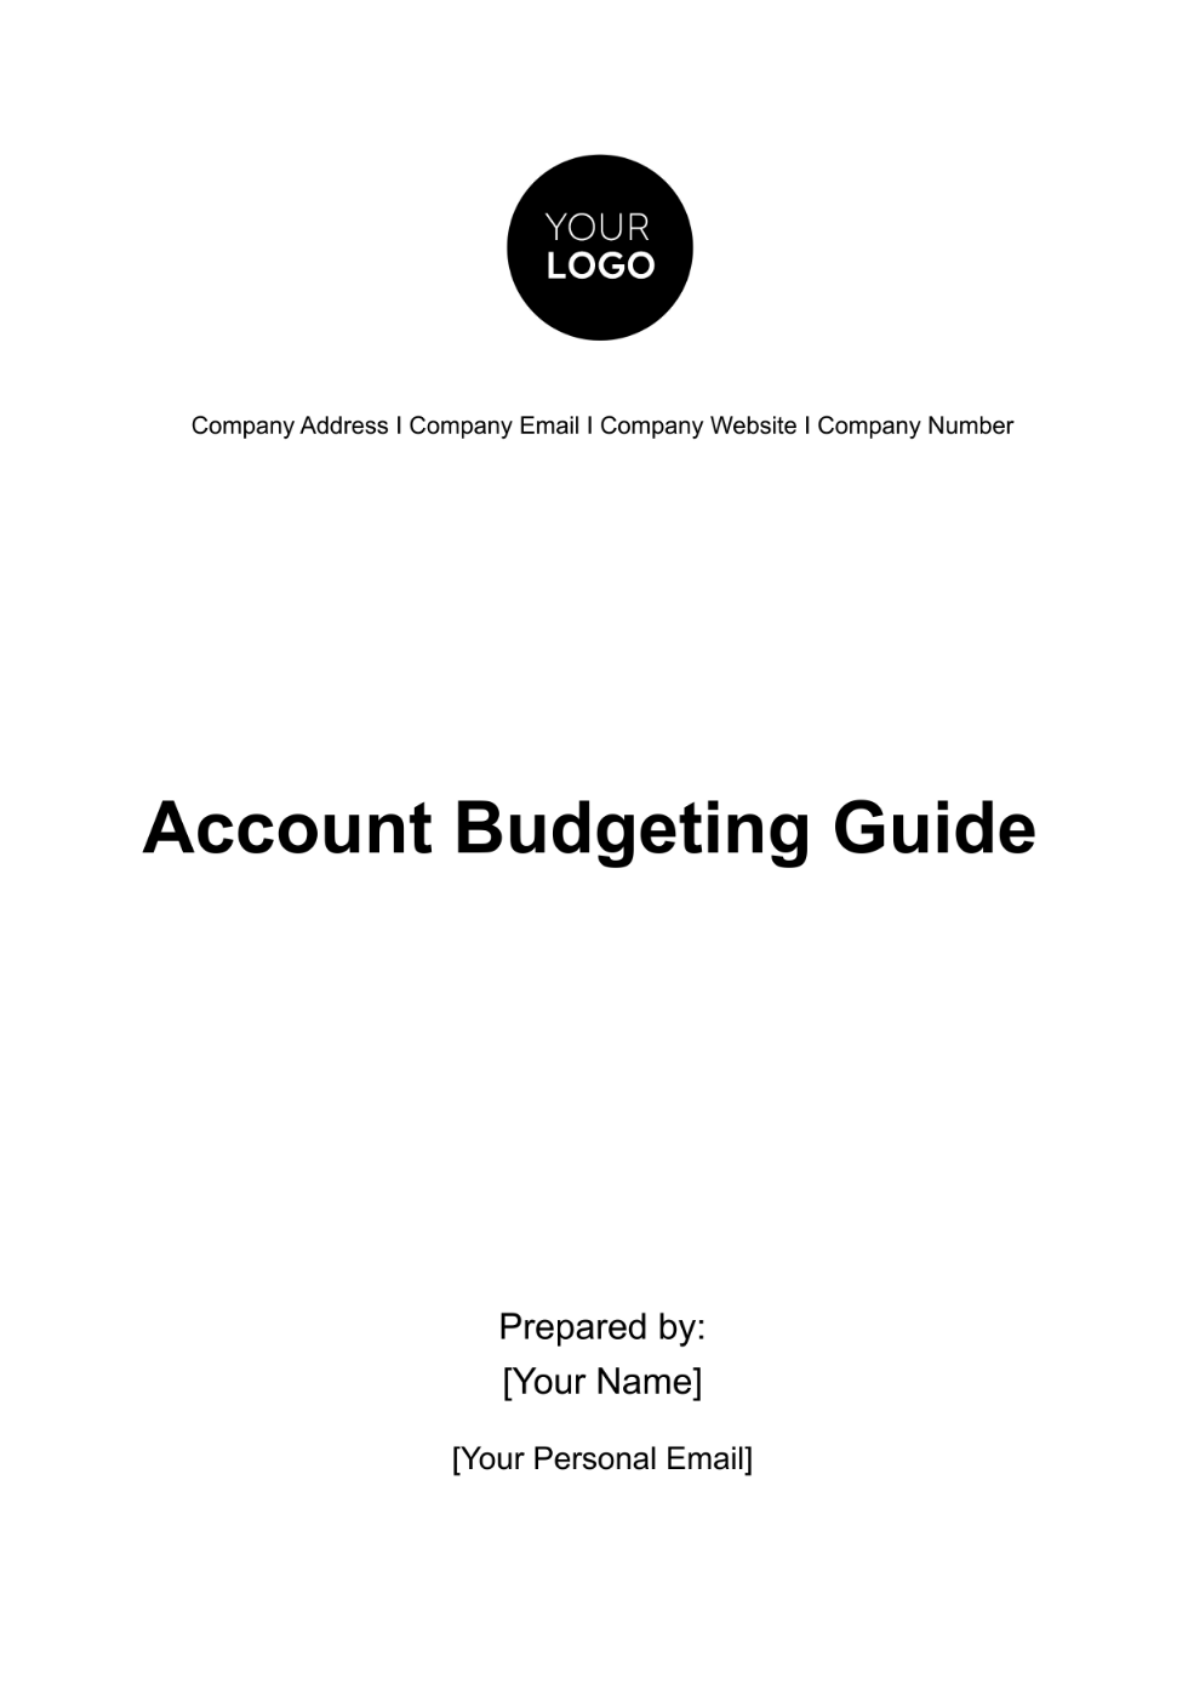 Free Account Budgeting Guide Template